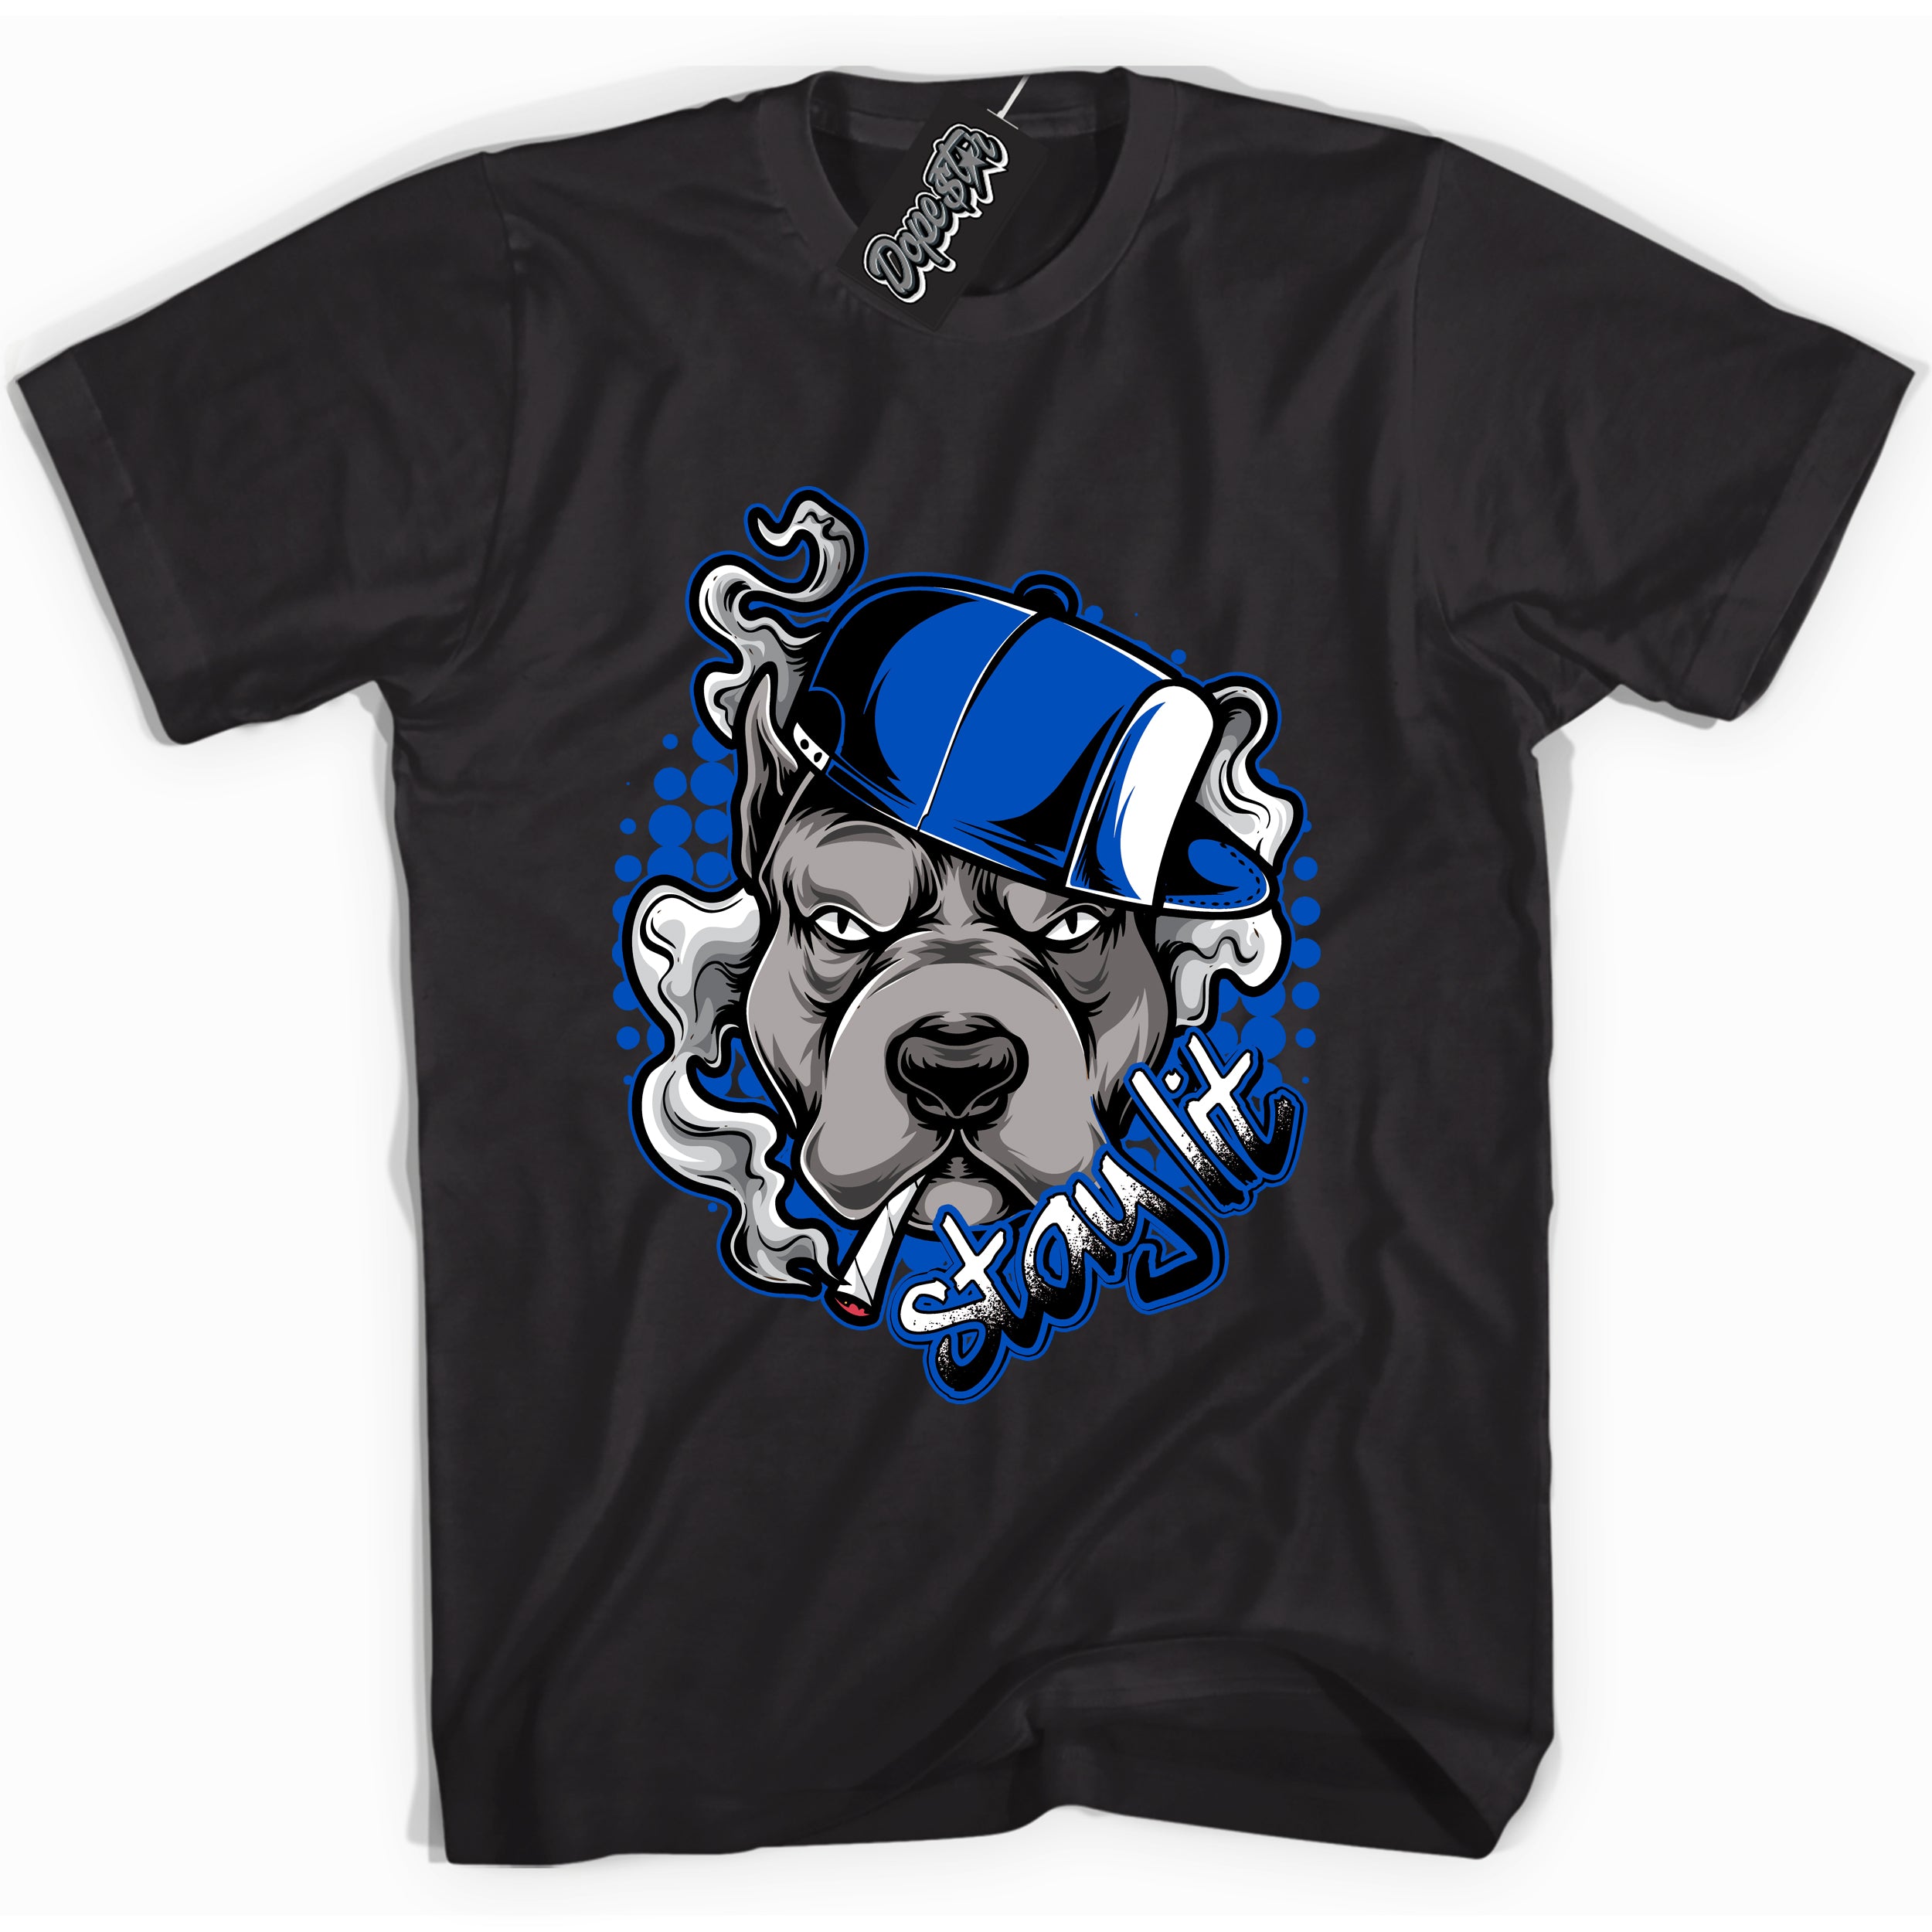 Cool Black graphic tee with "Stay Lit" design, that perfectly matches Royal Reimagined 1s sneakers 